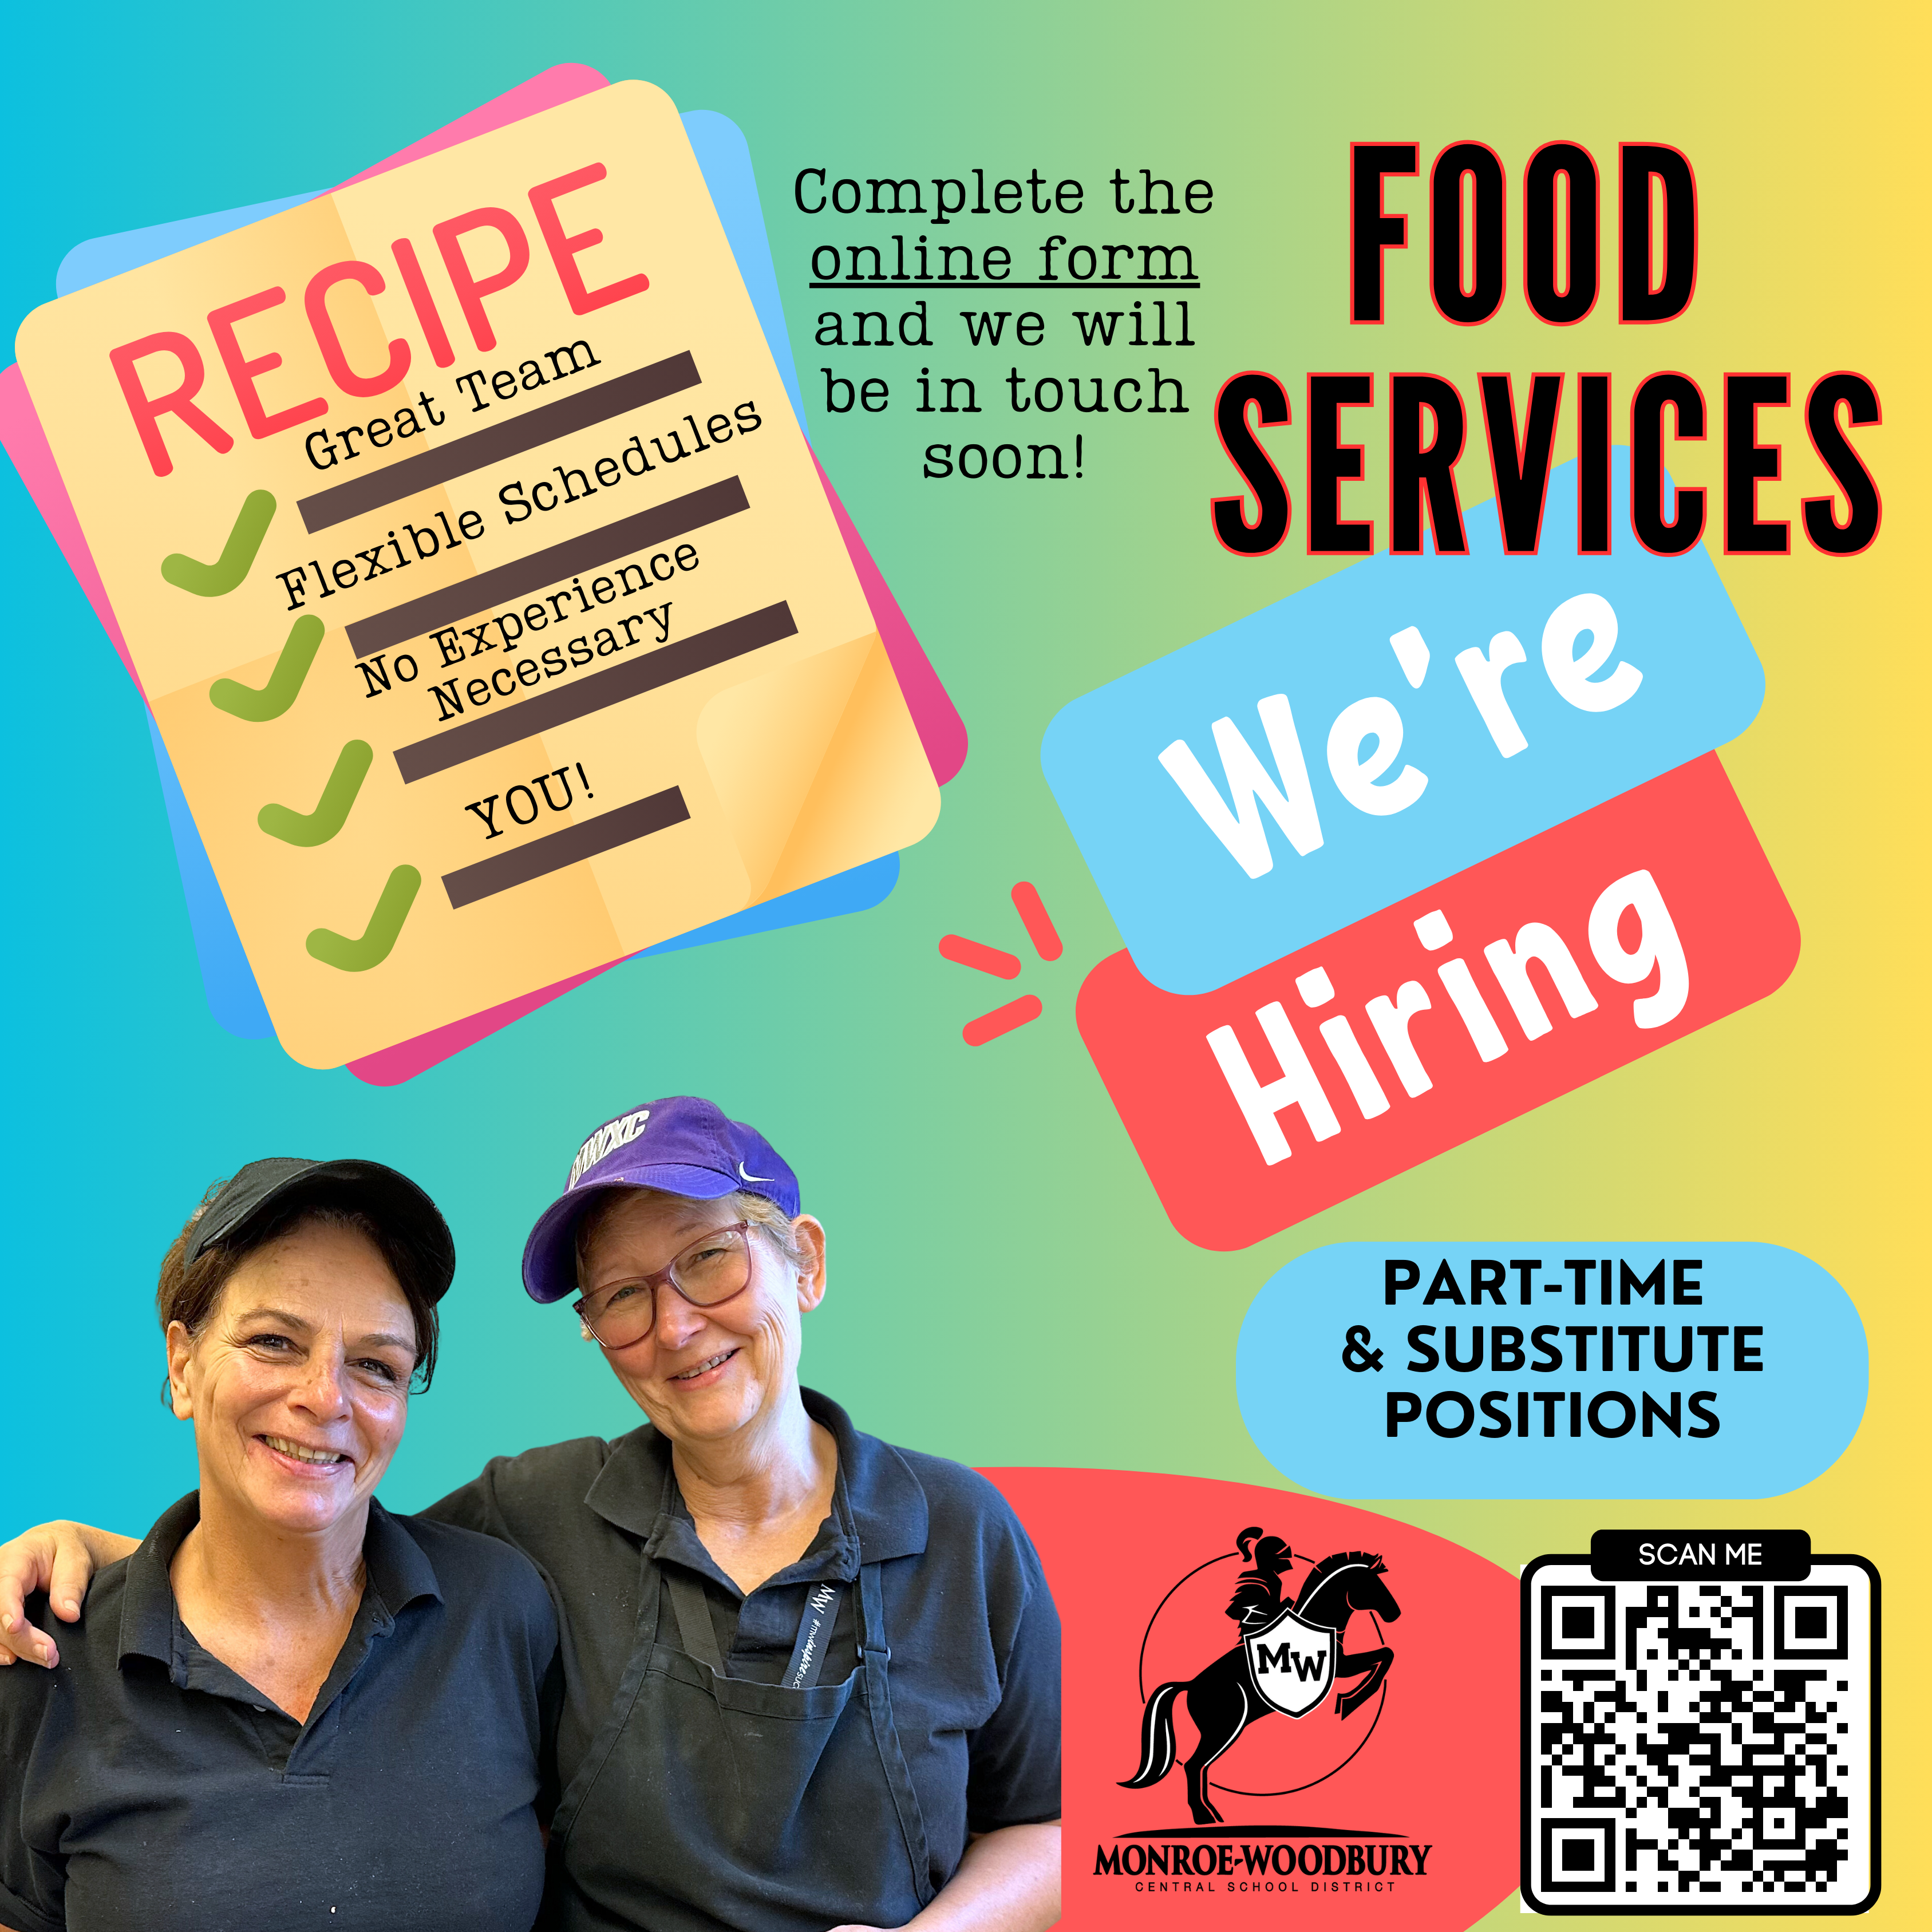 Food Services hiring